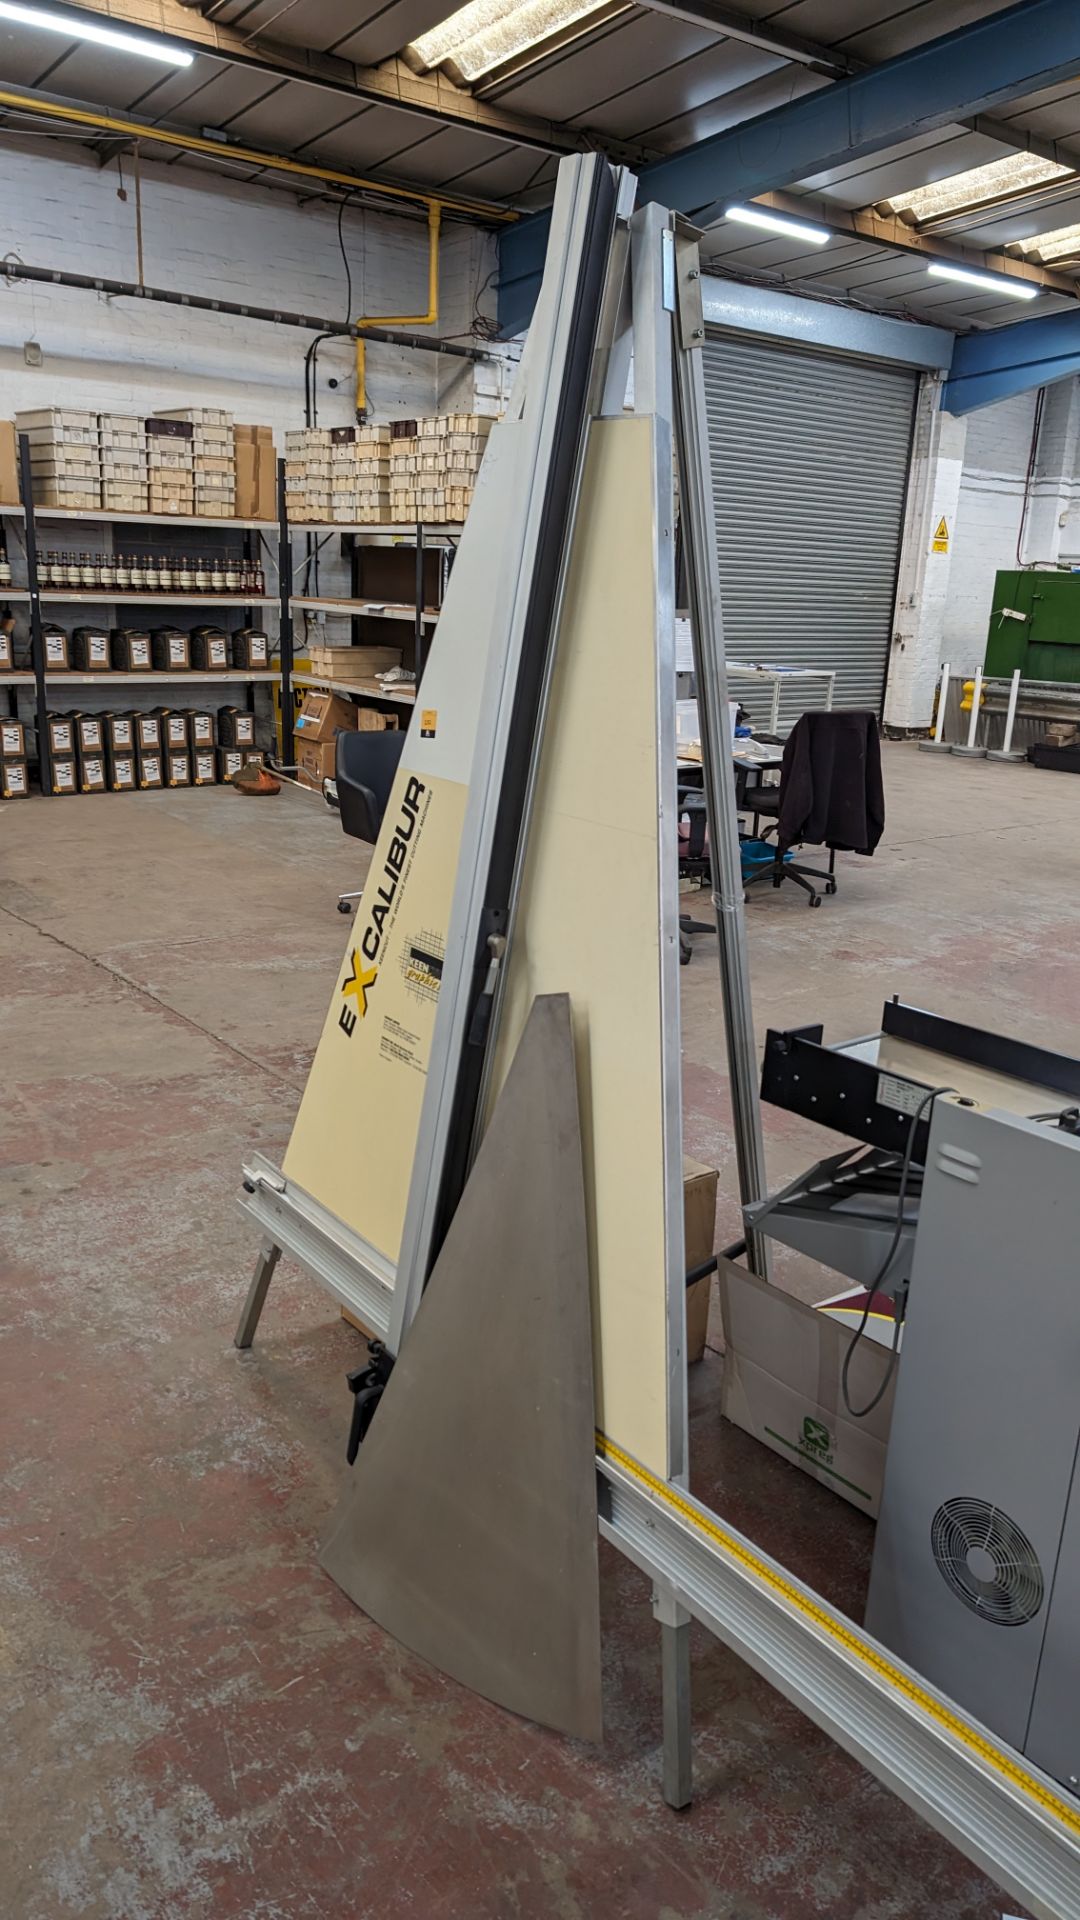 Keencut Graphics Excalibur A frame cutter. Height approximately 2330mm, max width including measuri - Bild 9 aus 13